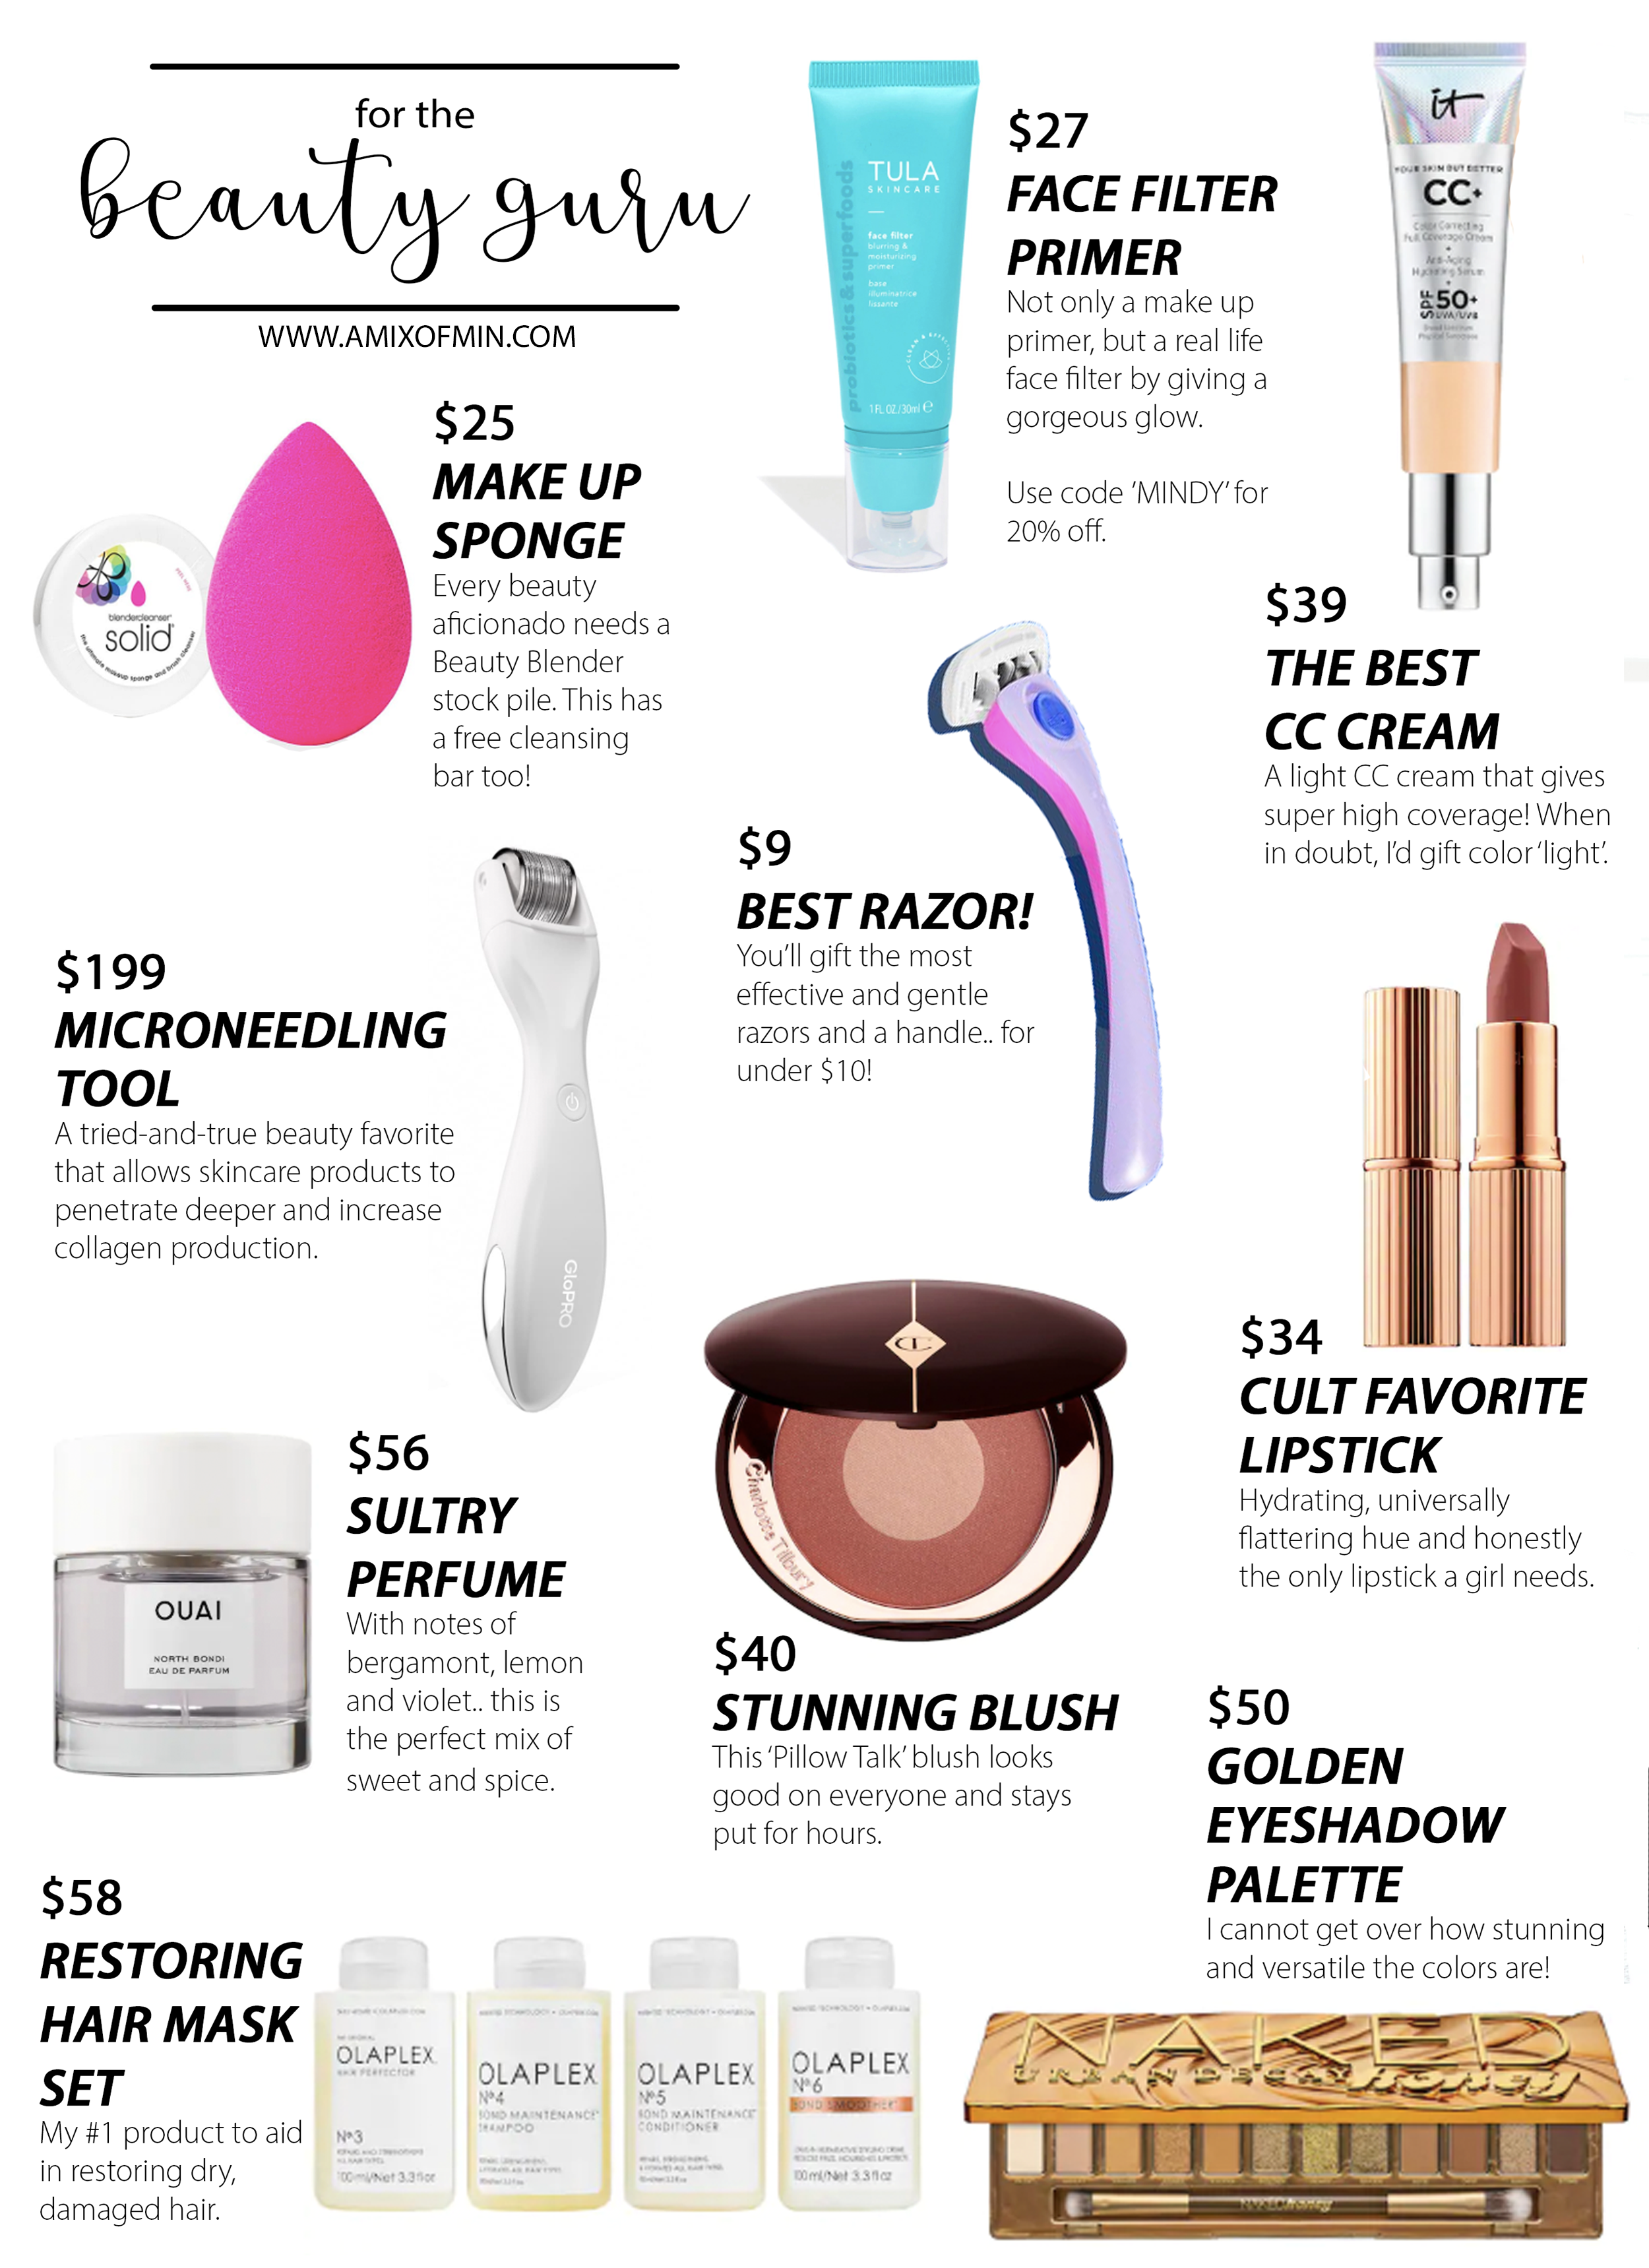 HOLIDAY GIFT GUIDE BEAUTY LOVER